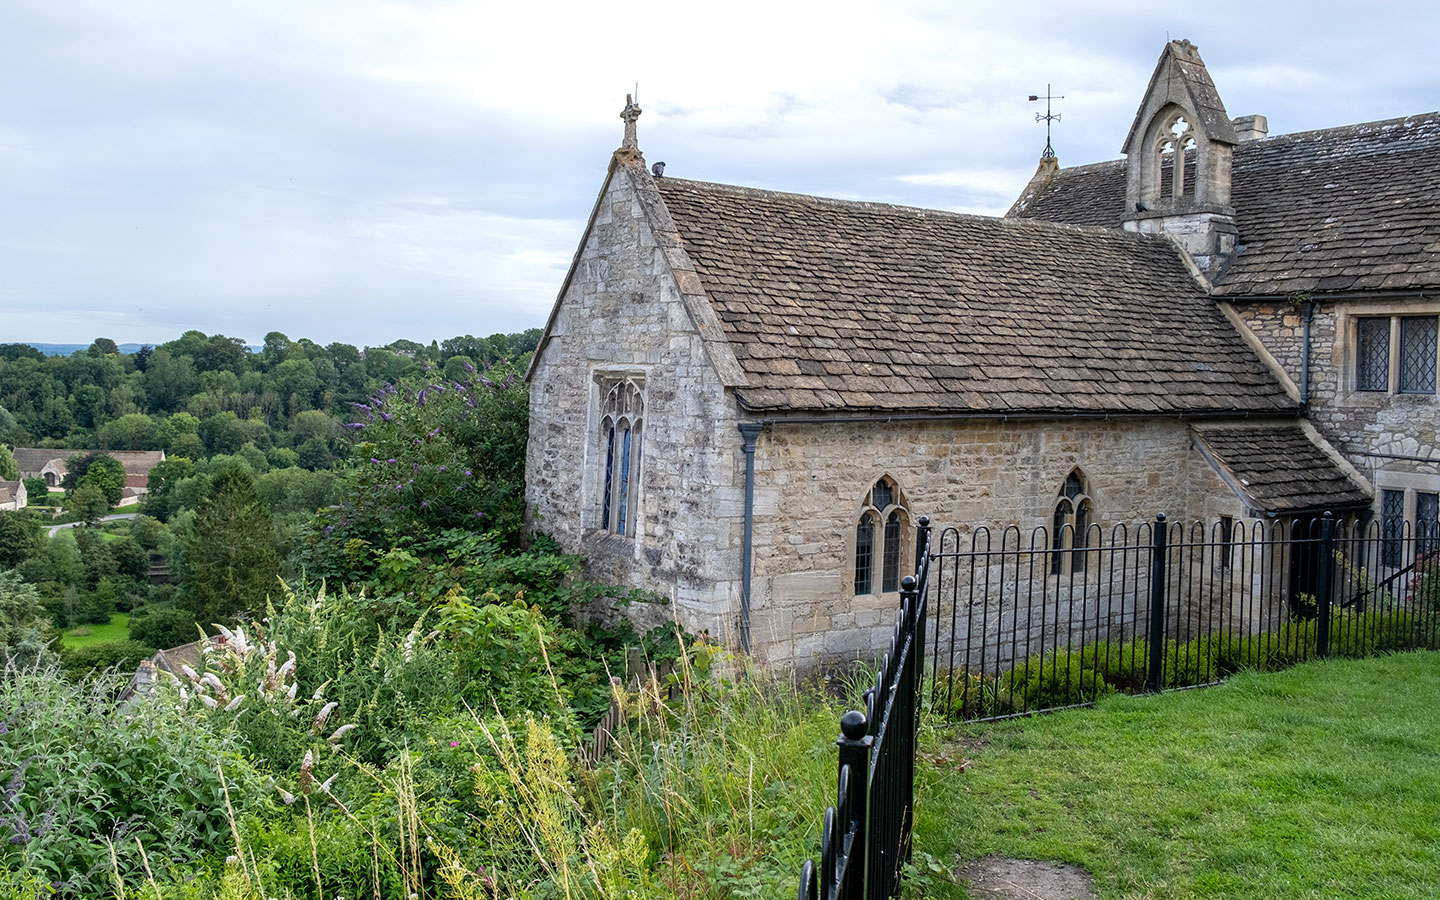 The Chapel of St Mary Tory in Bradford on Avon